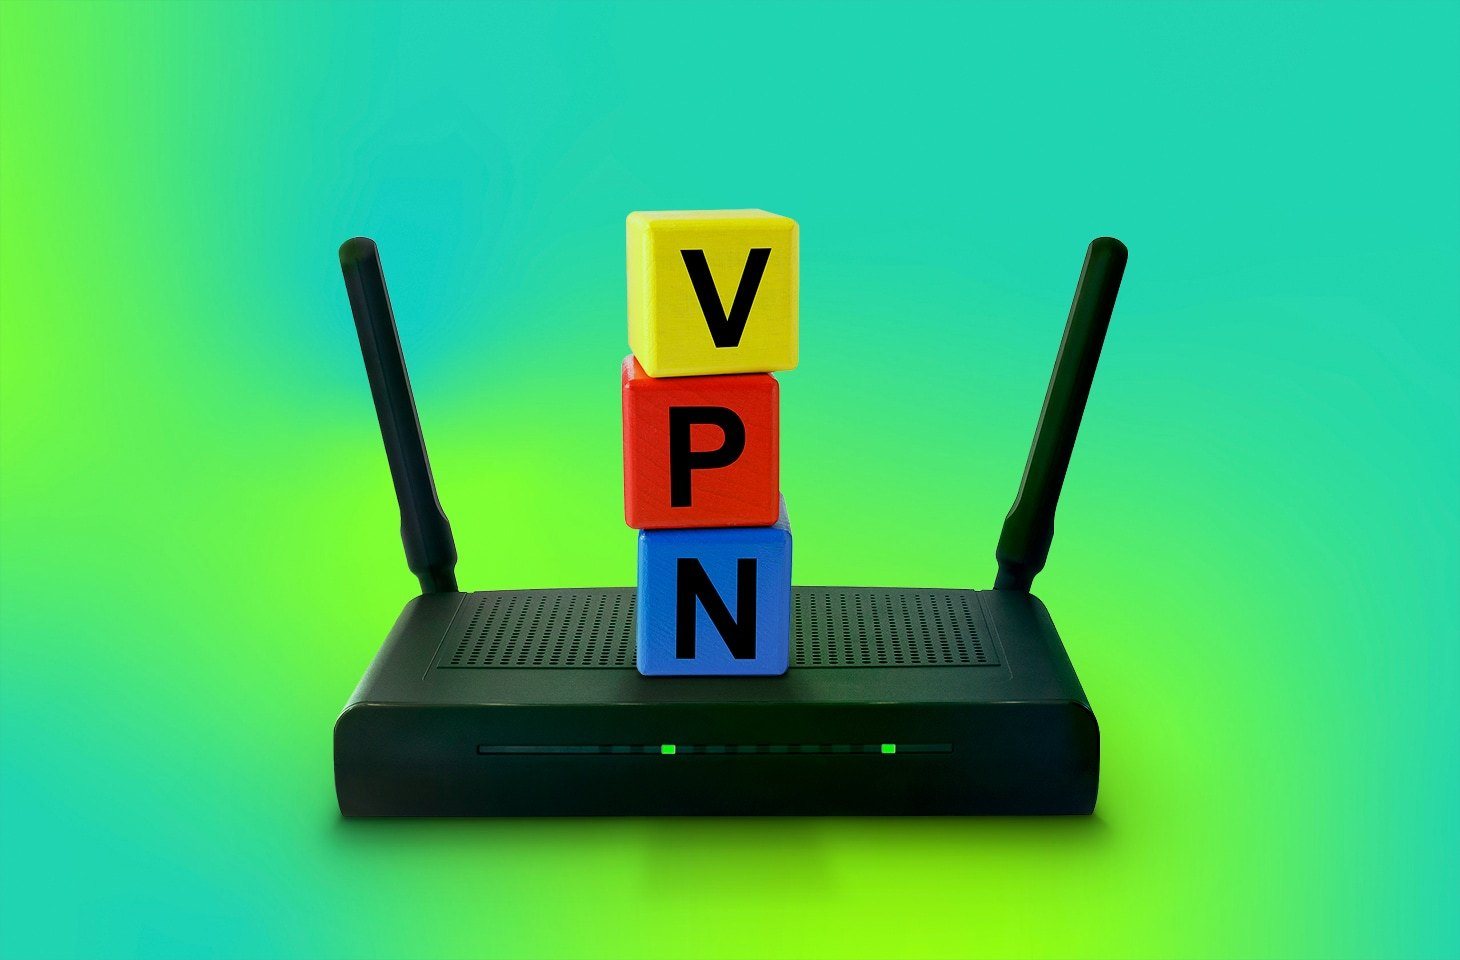 Network-wide protection: How to set up a VPN on a router